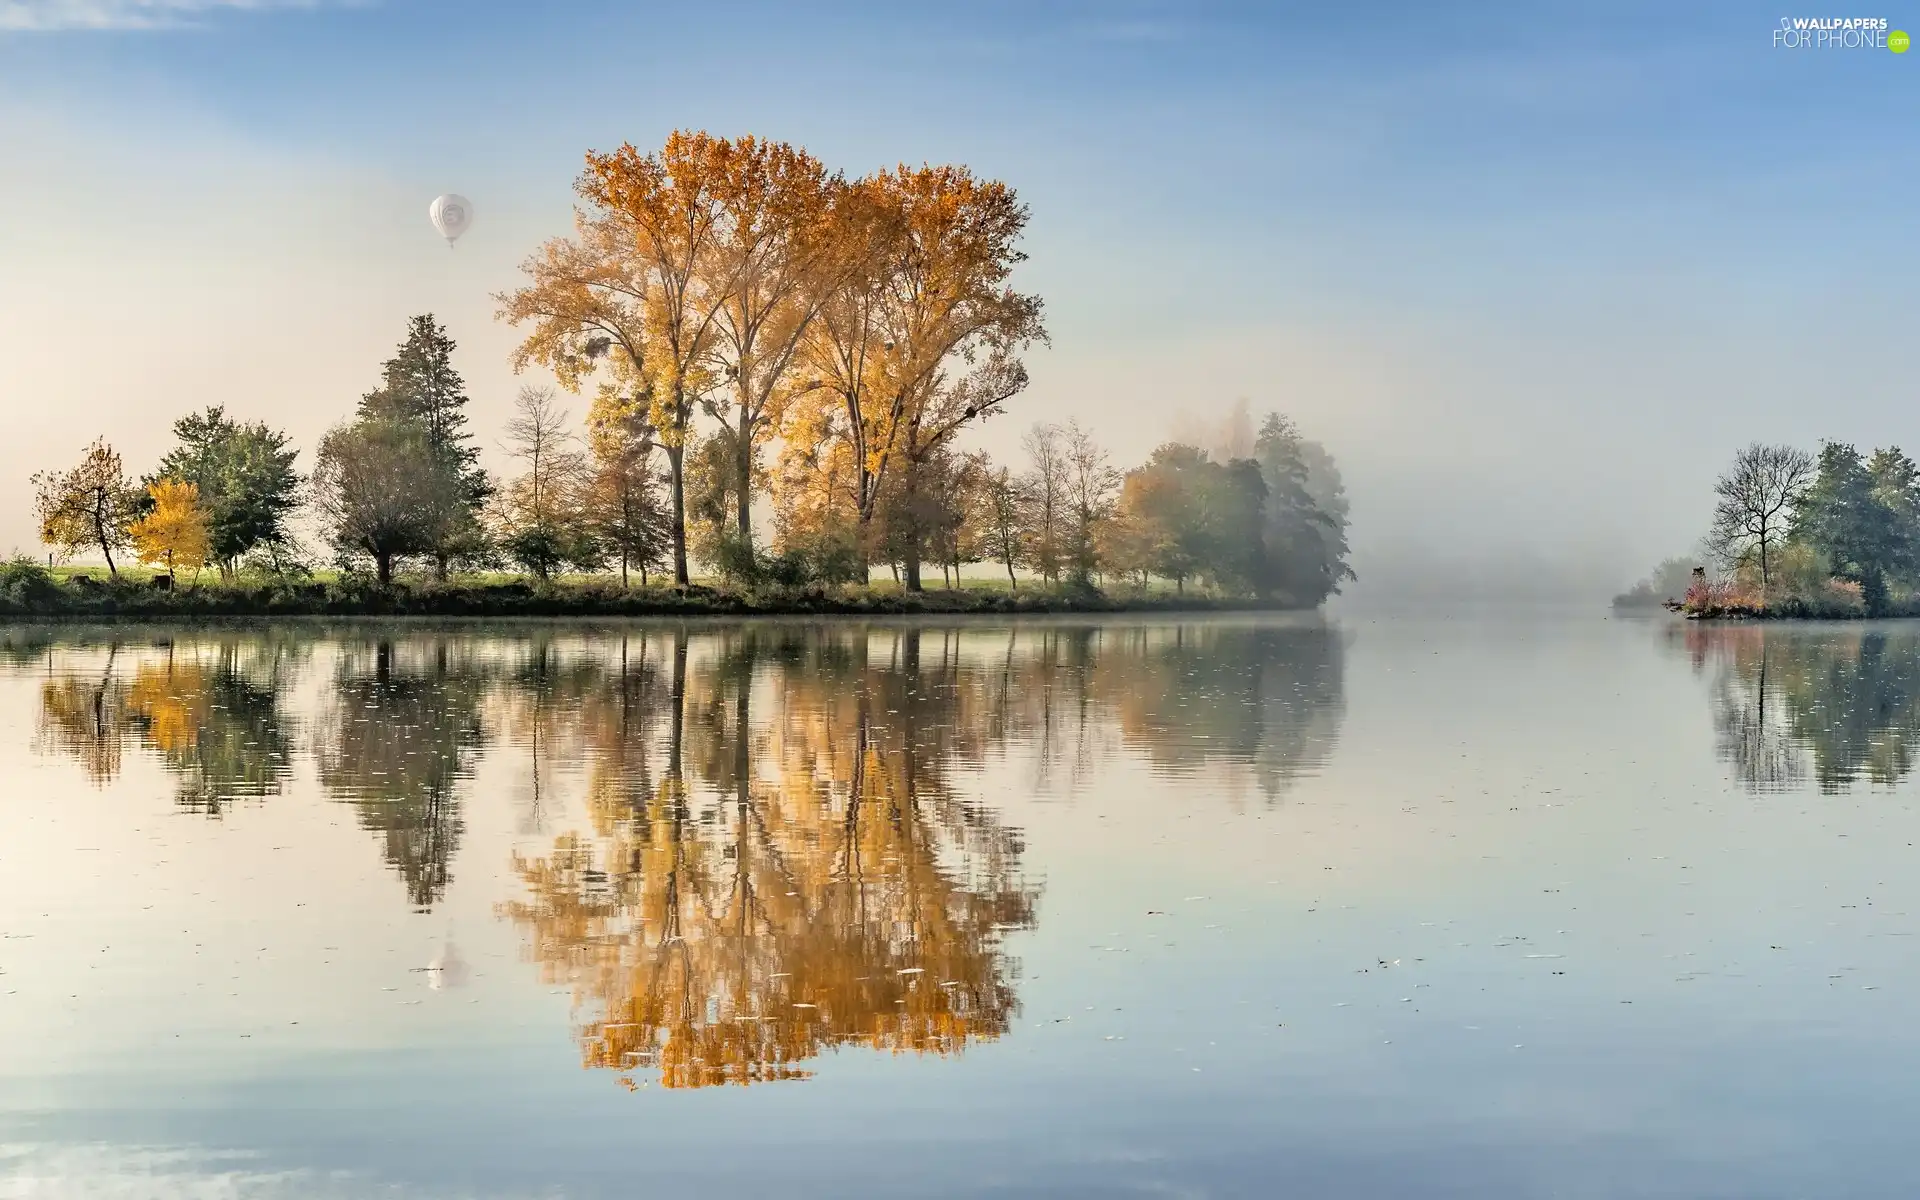 viewes, Fog, Balloon, trees, River, reflection, autumn